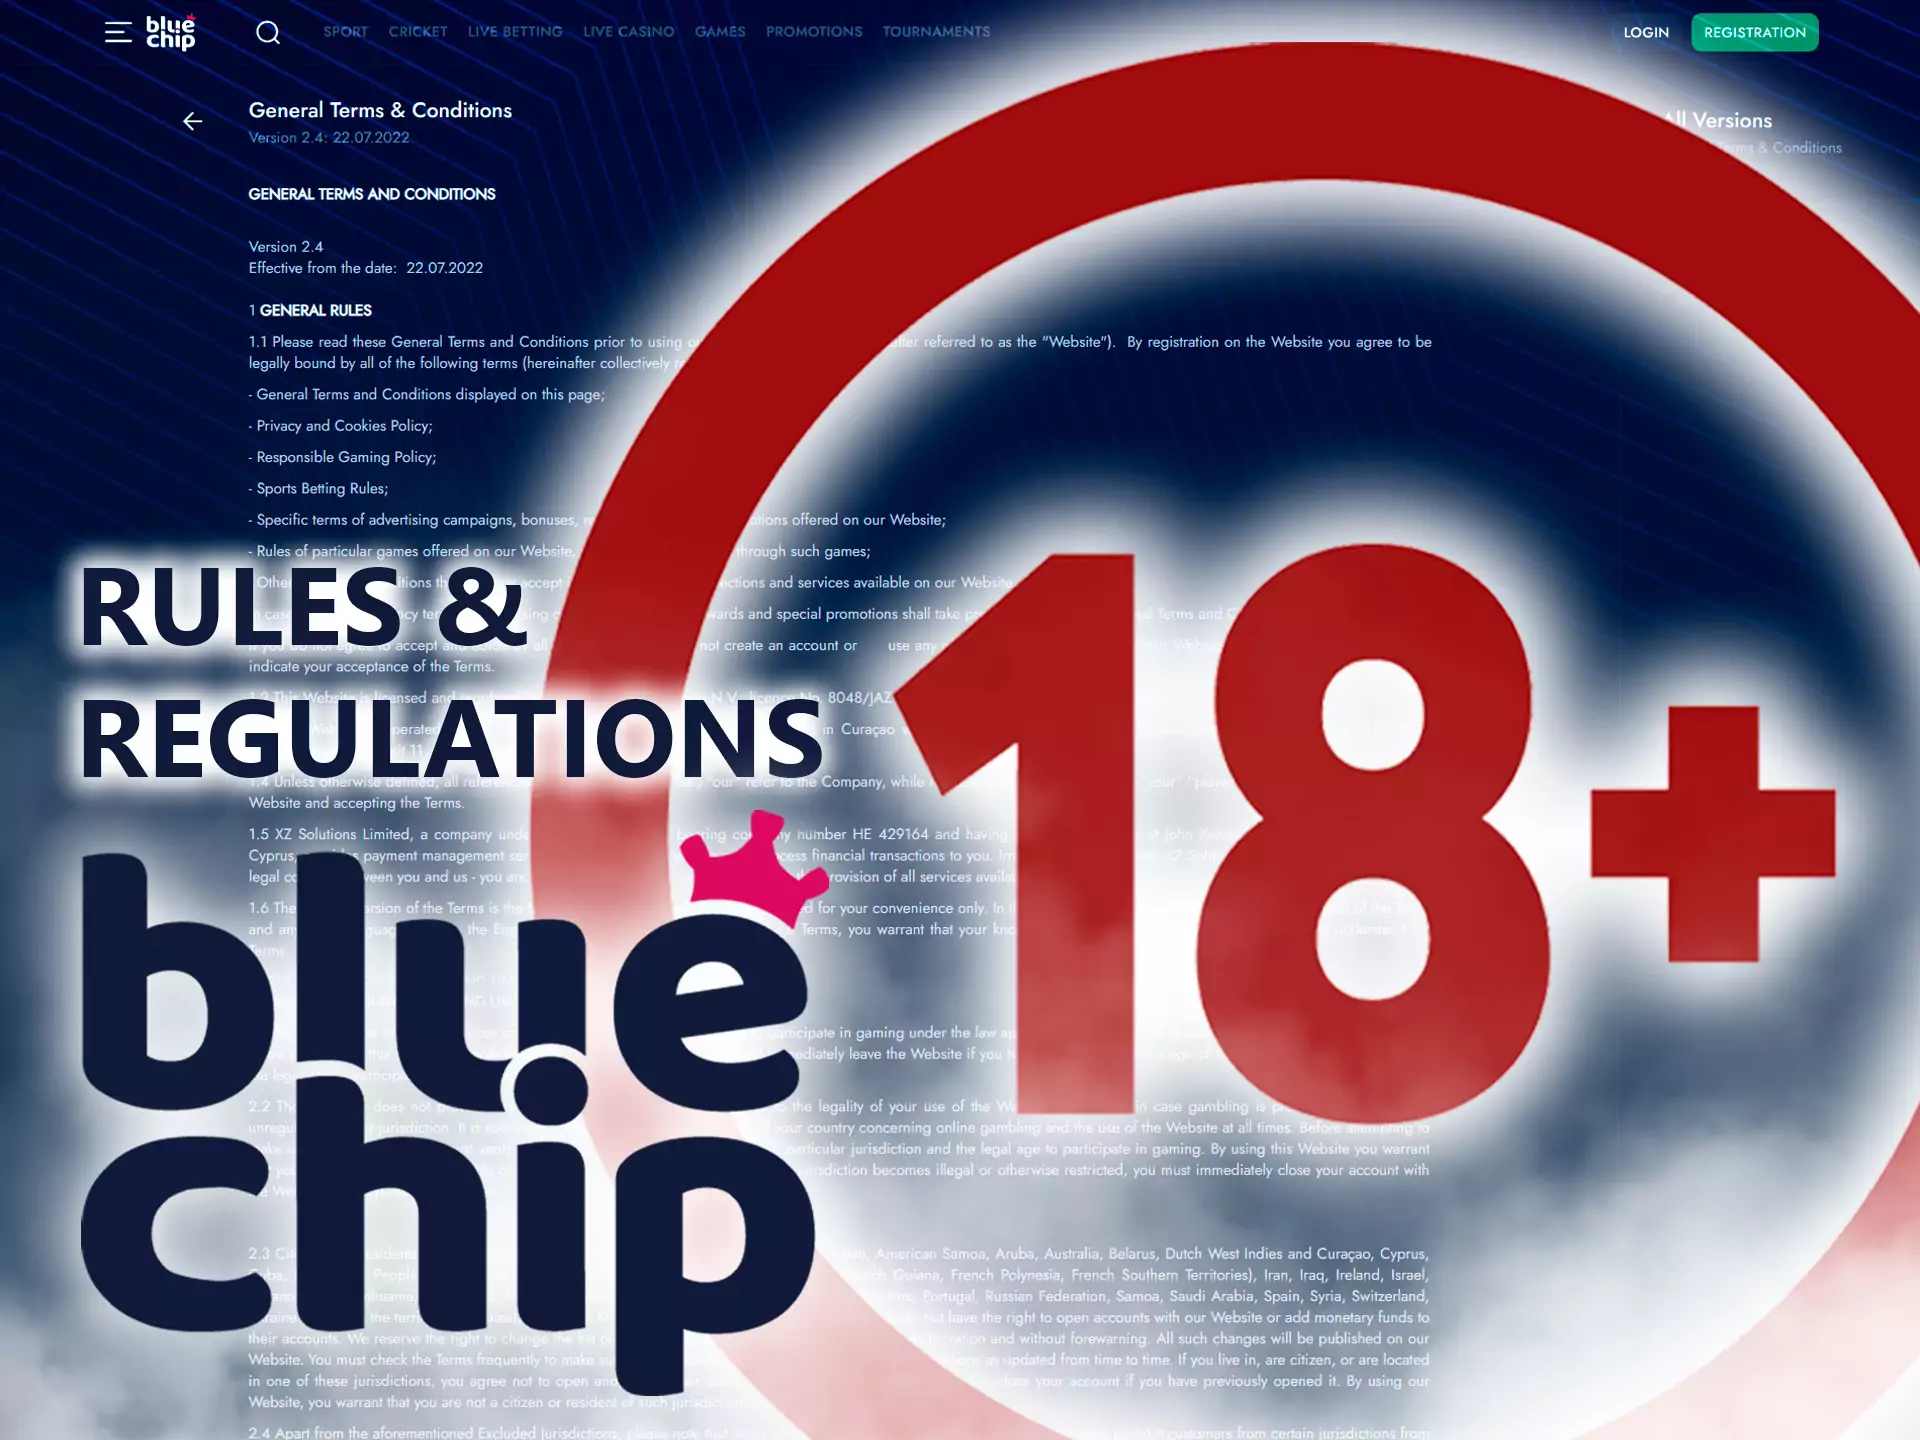 Pay attention to Bluechip's rules before you make a bet or start playing casino games.